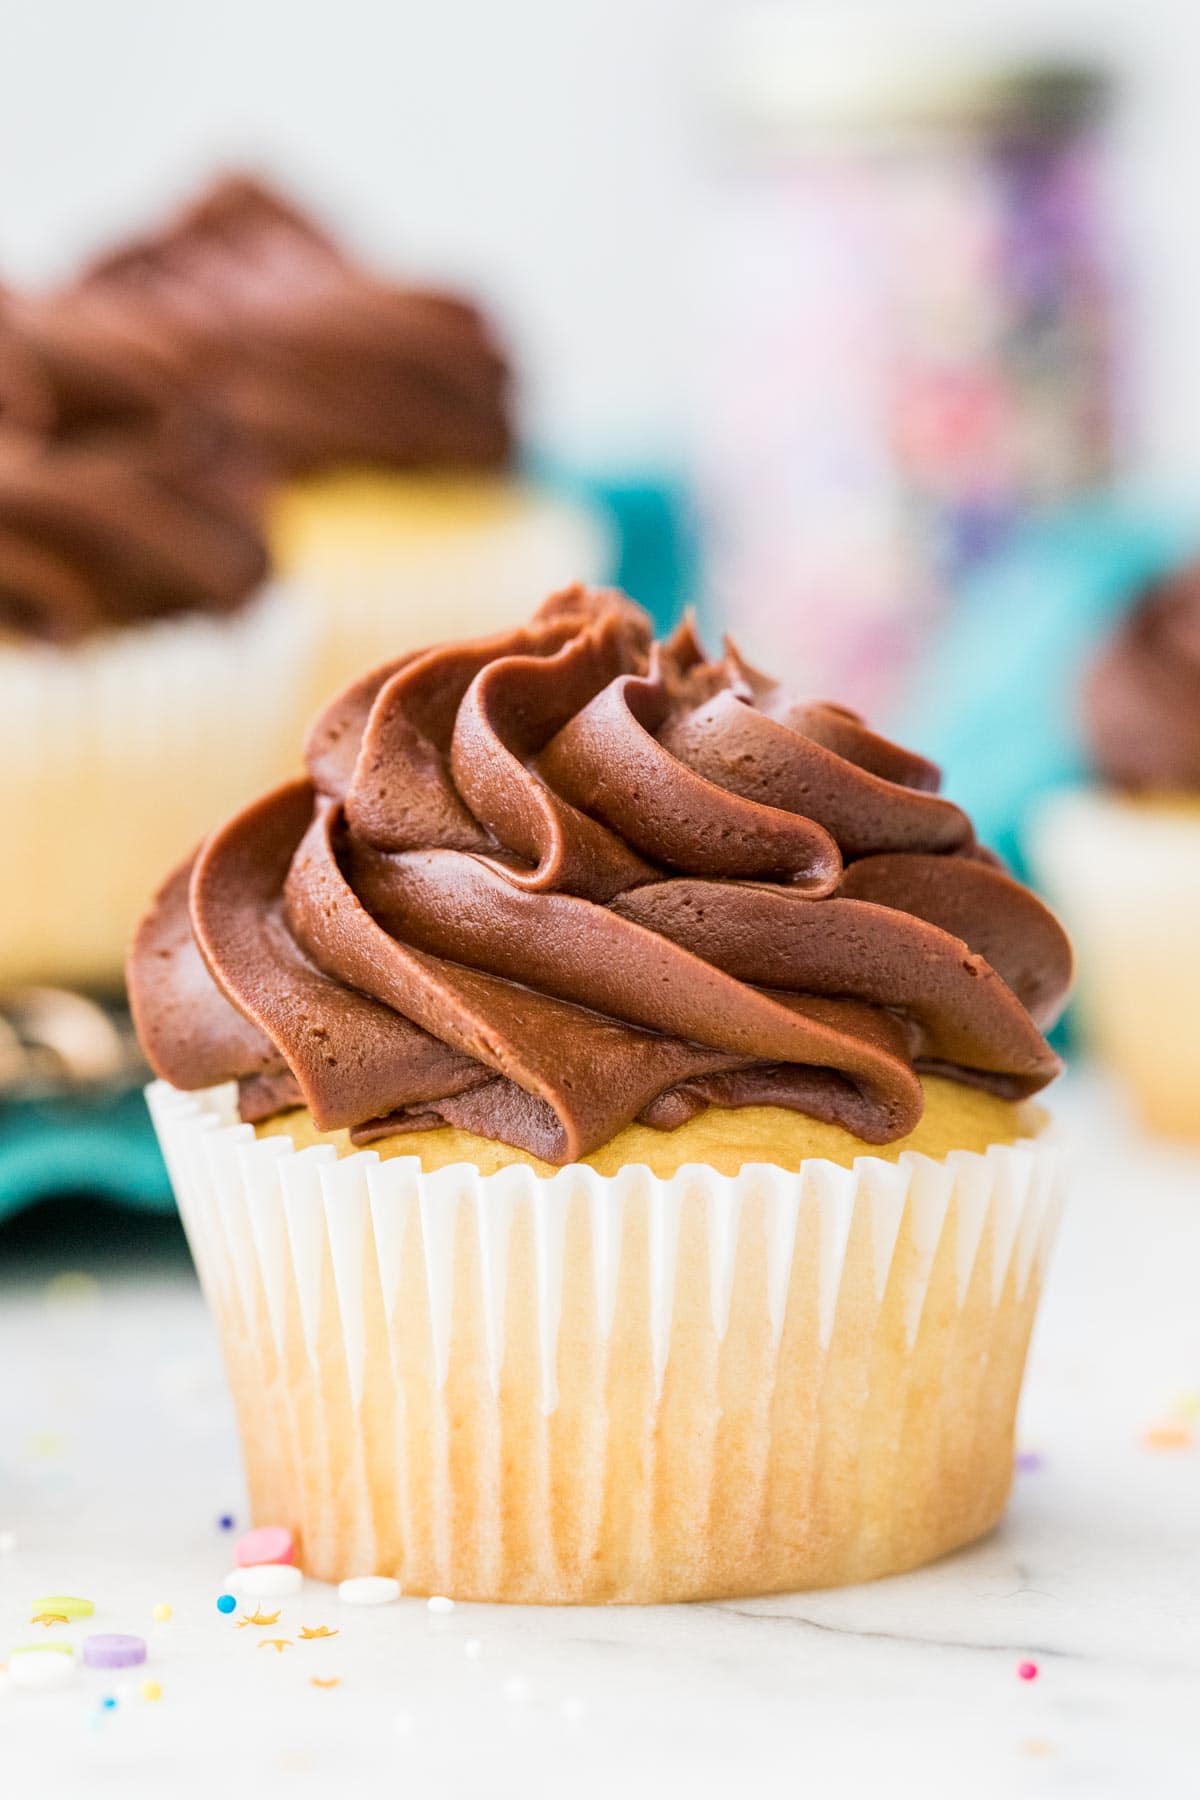 Chocolate fudge frosting on a cupcake